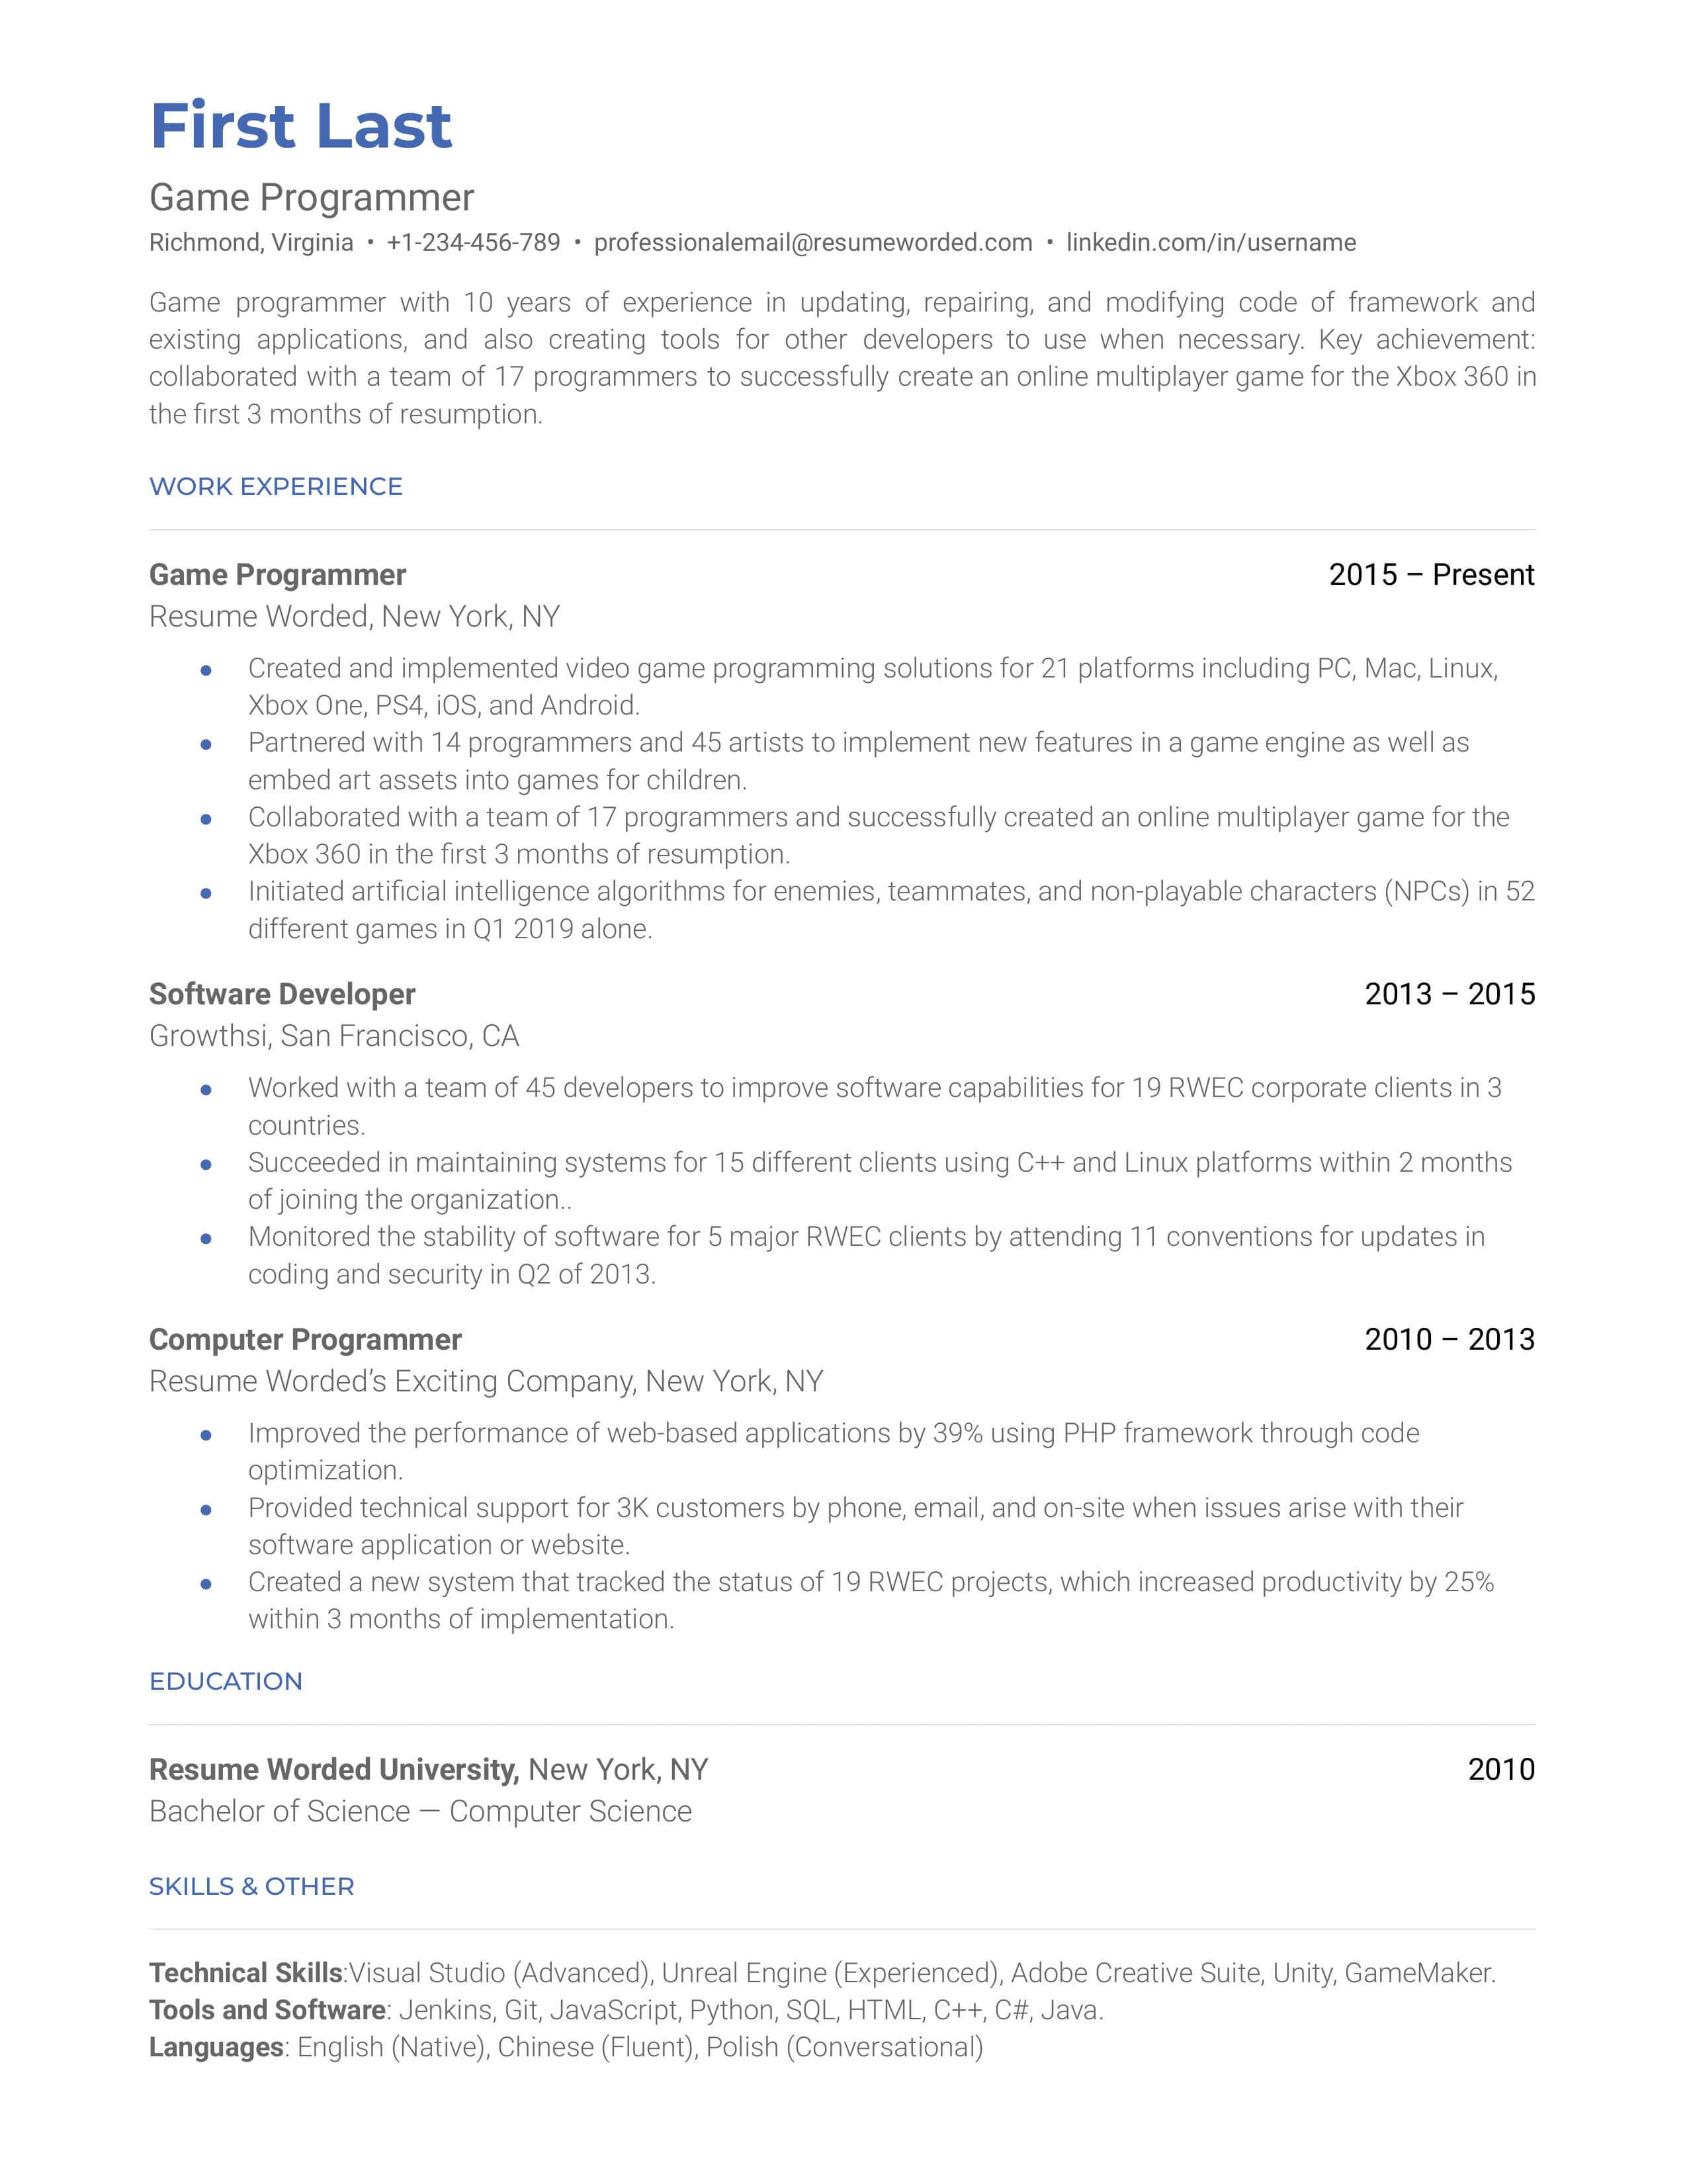 A game development resume that includes contact information and showcases relevant experience